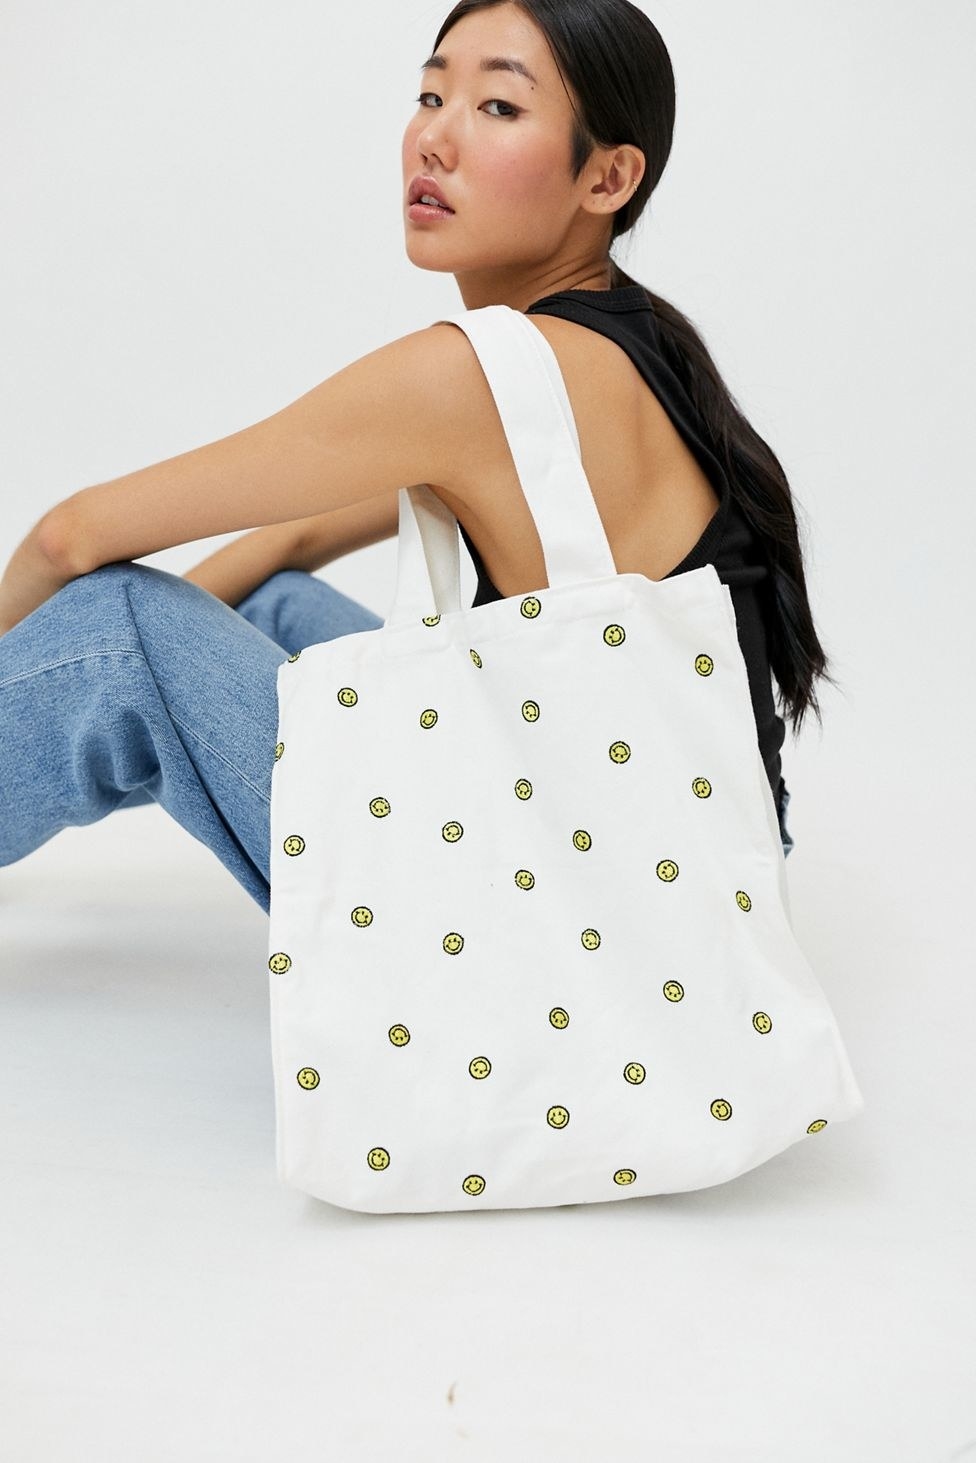 a model holding a white tote with embroidered smiley faces all over it